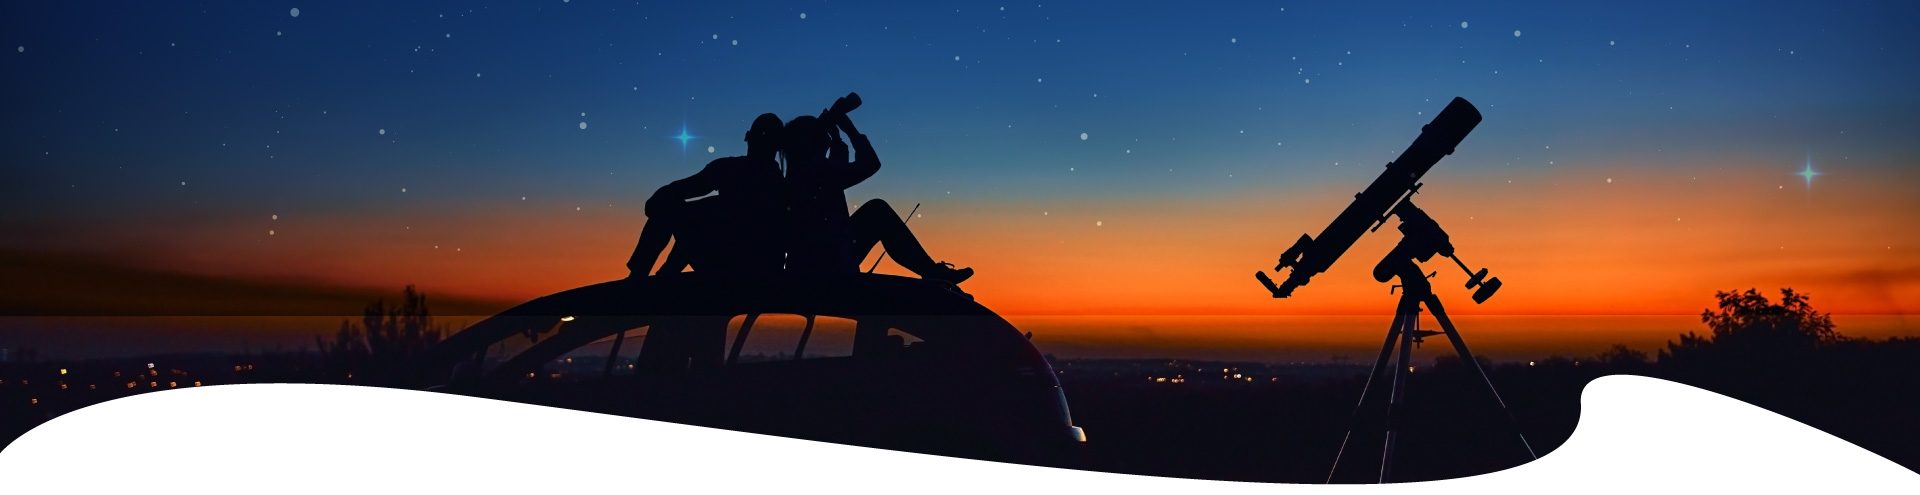 Couple viewing the stars with telescopes